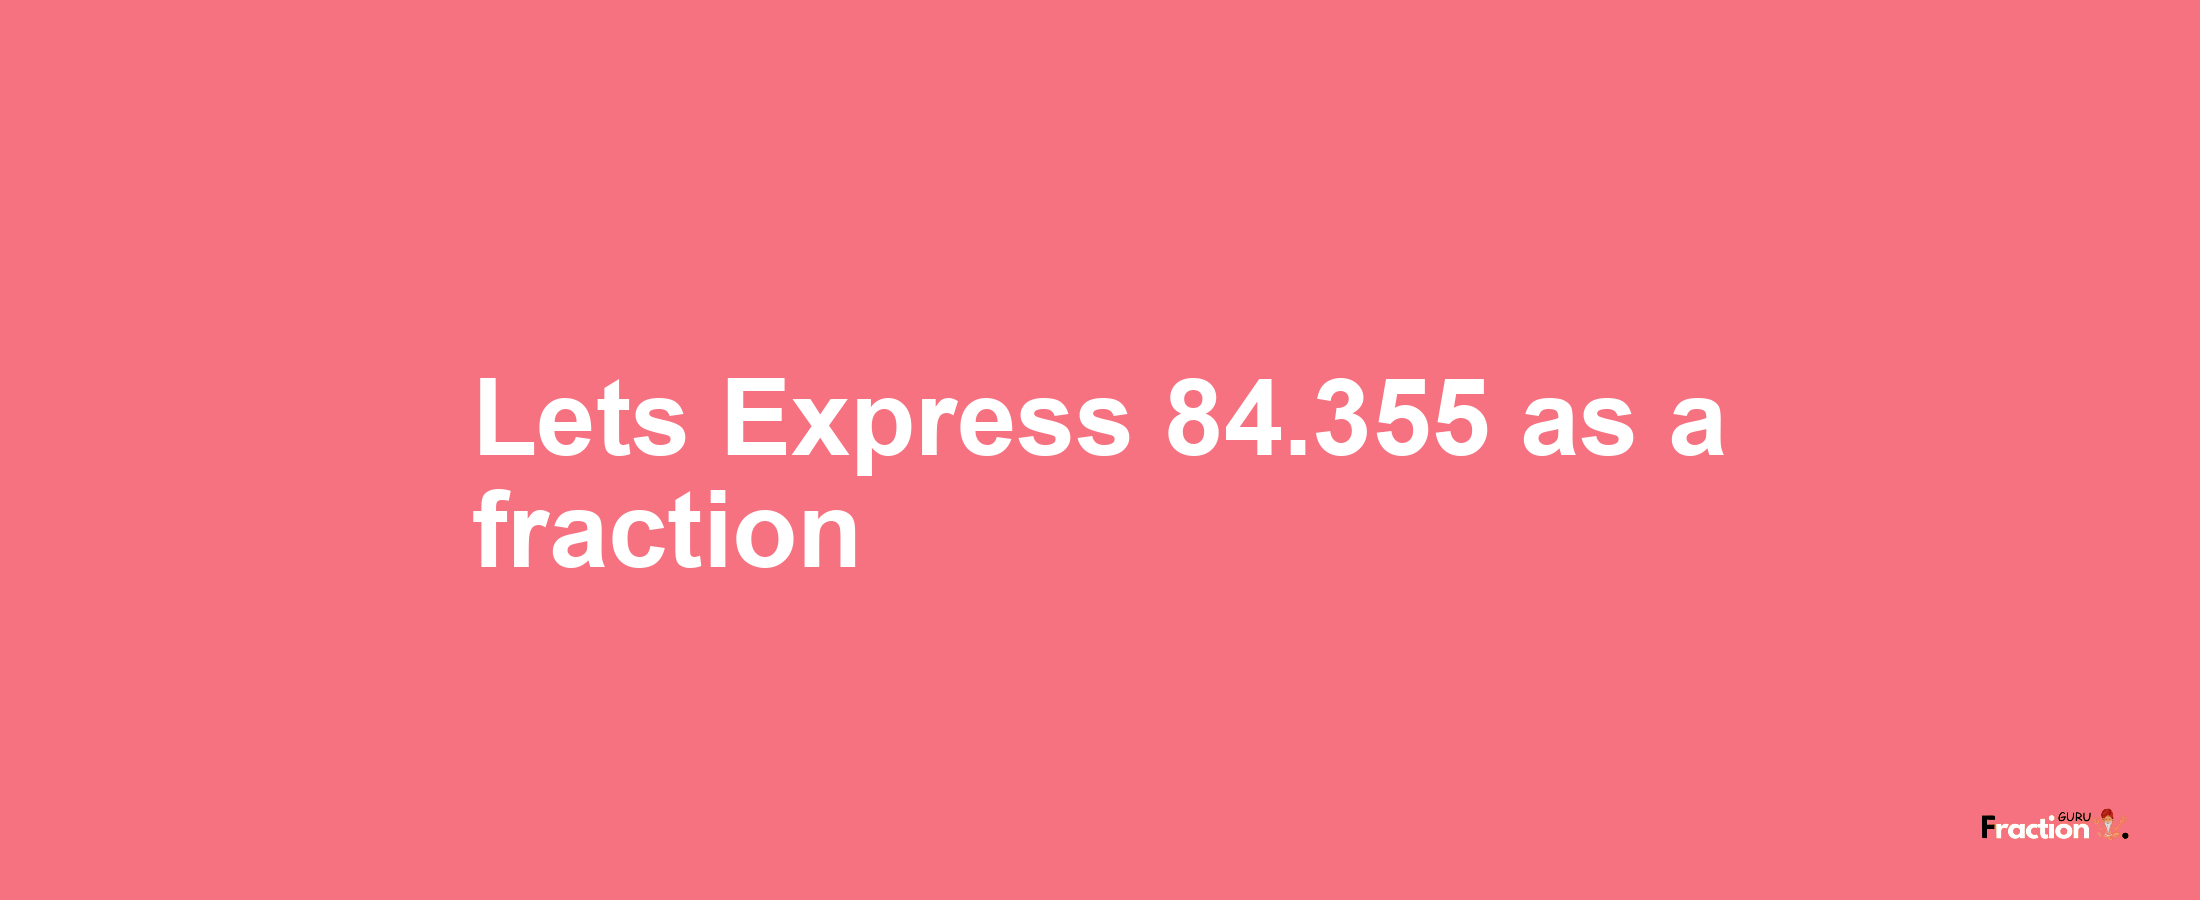 Lets Express 84.355 as afraction